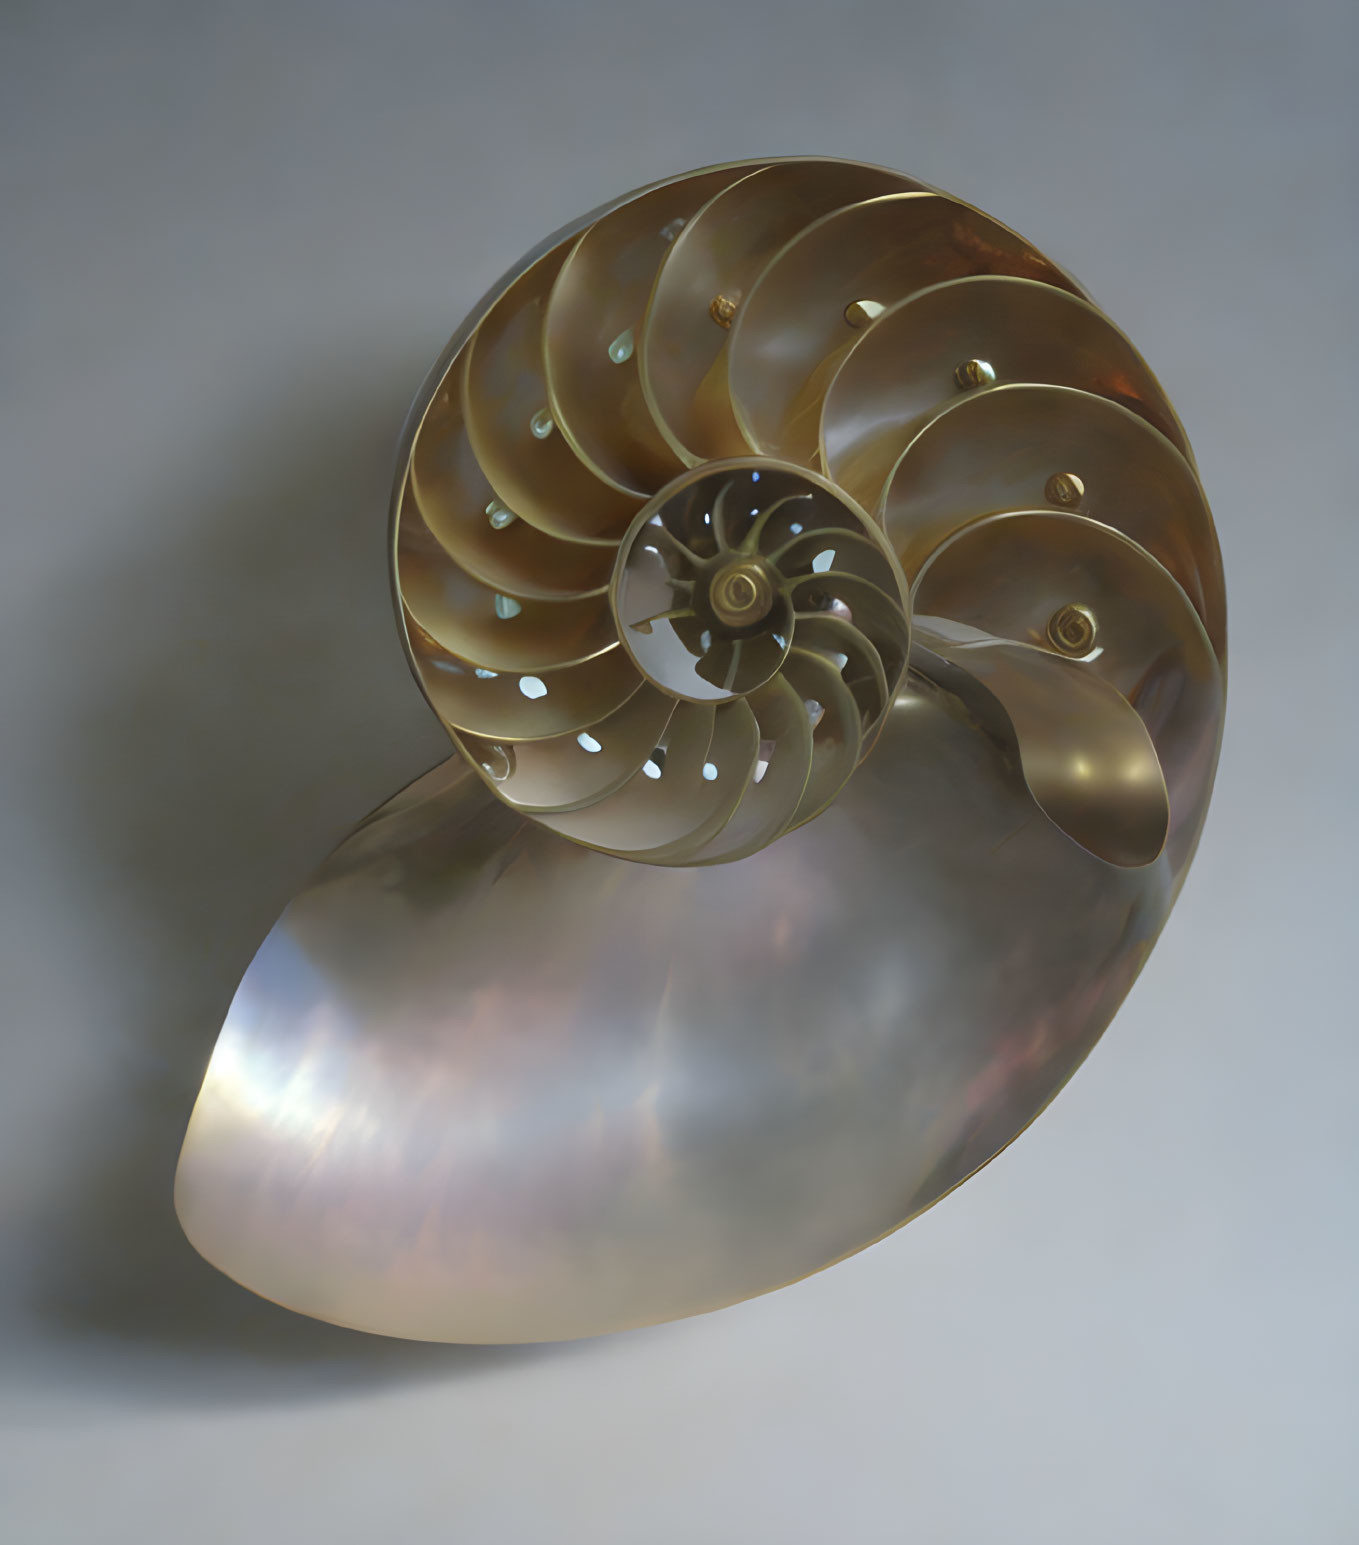 Polished Nautilus Shell Cutaway Showing Spiral Structure